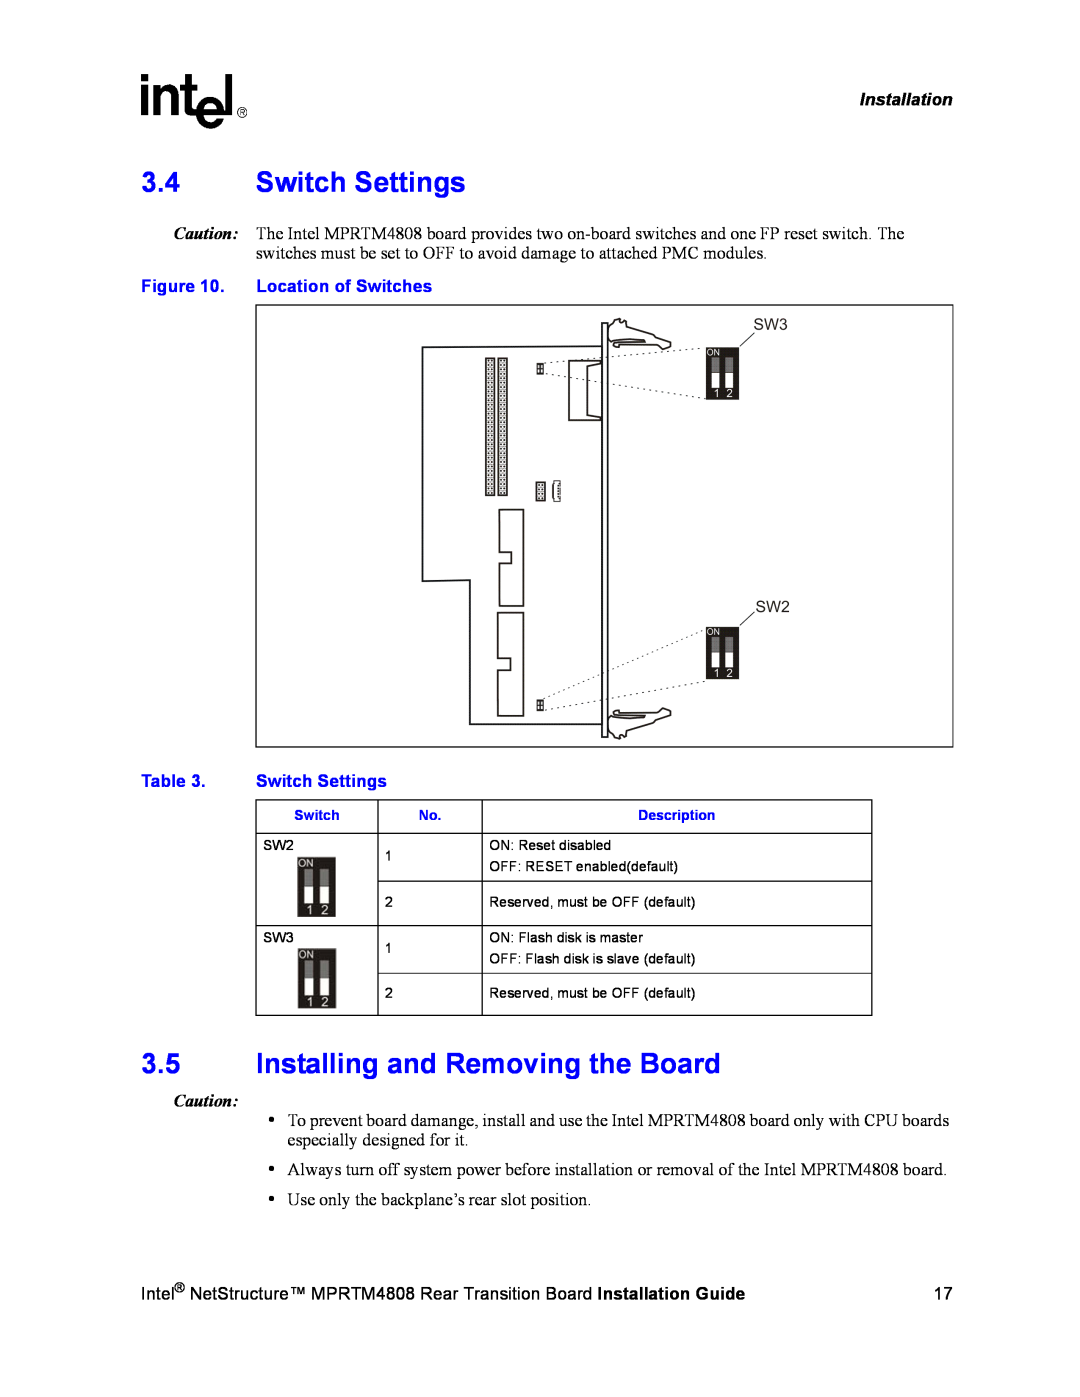 Intel MPRTM4808 manual 3.4Switch Settings, 3.5Installing and Removing the Board, Location of Switches, Installation, Table 